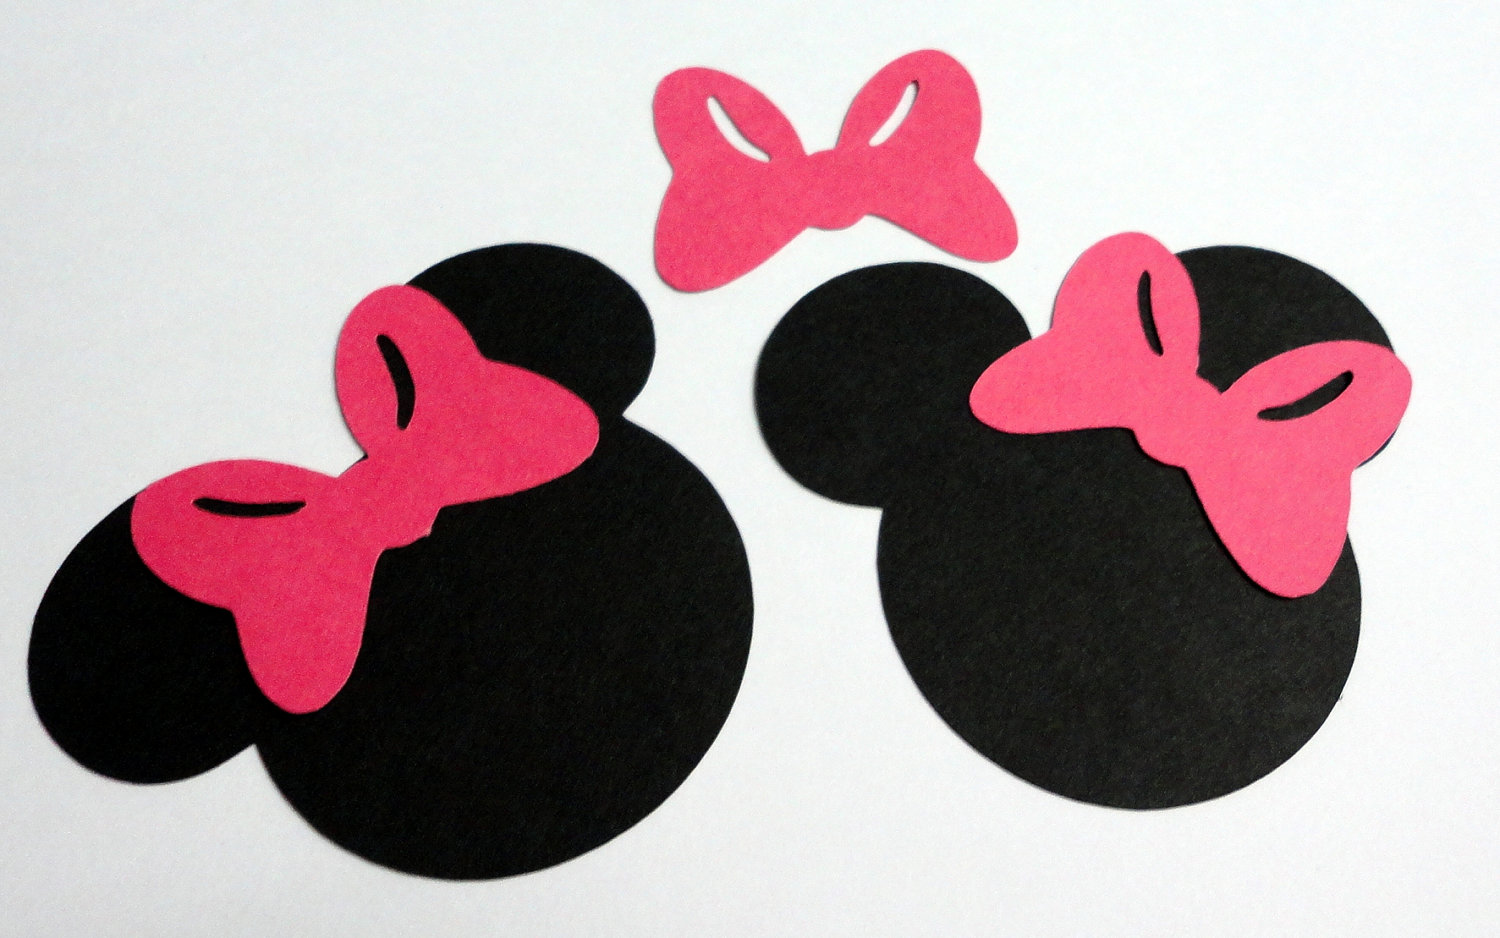 30 2.5 Minnie Mouse Head Silhouettes Black by StartedByAMouse1928